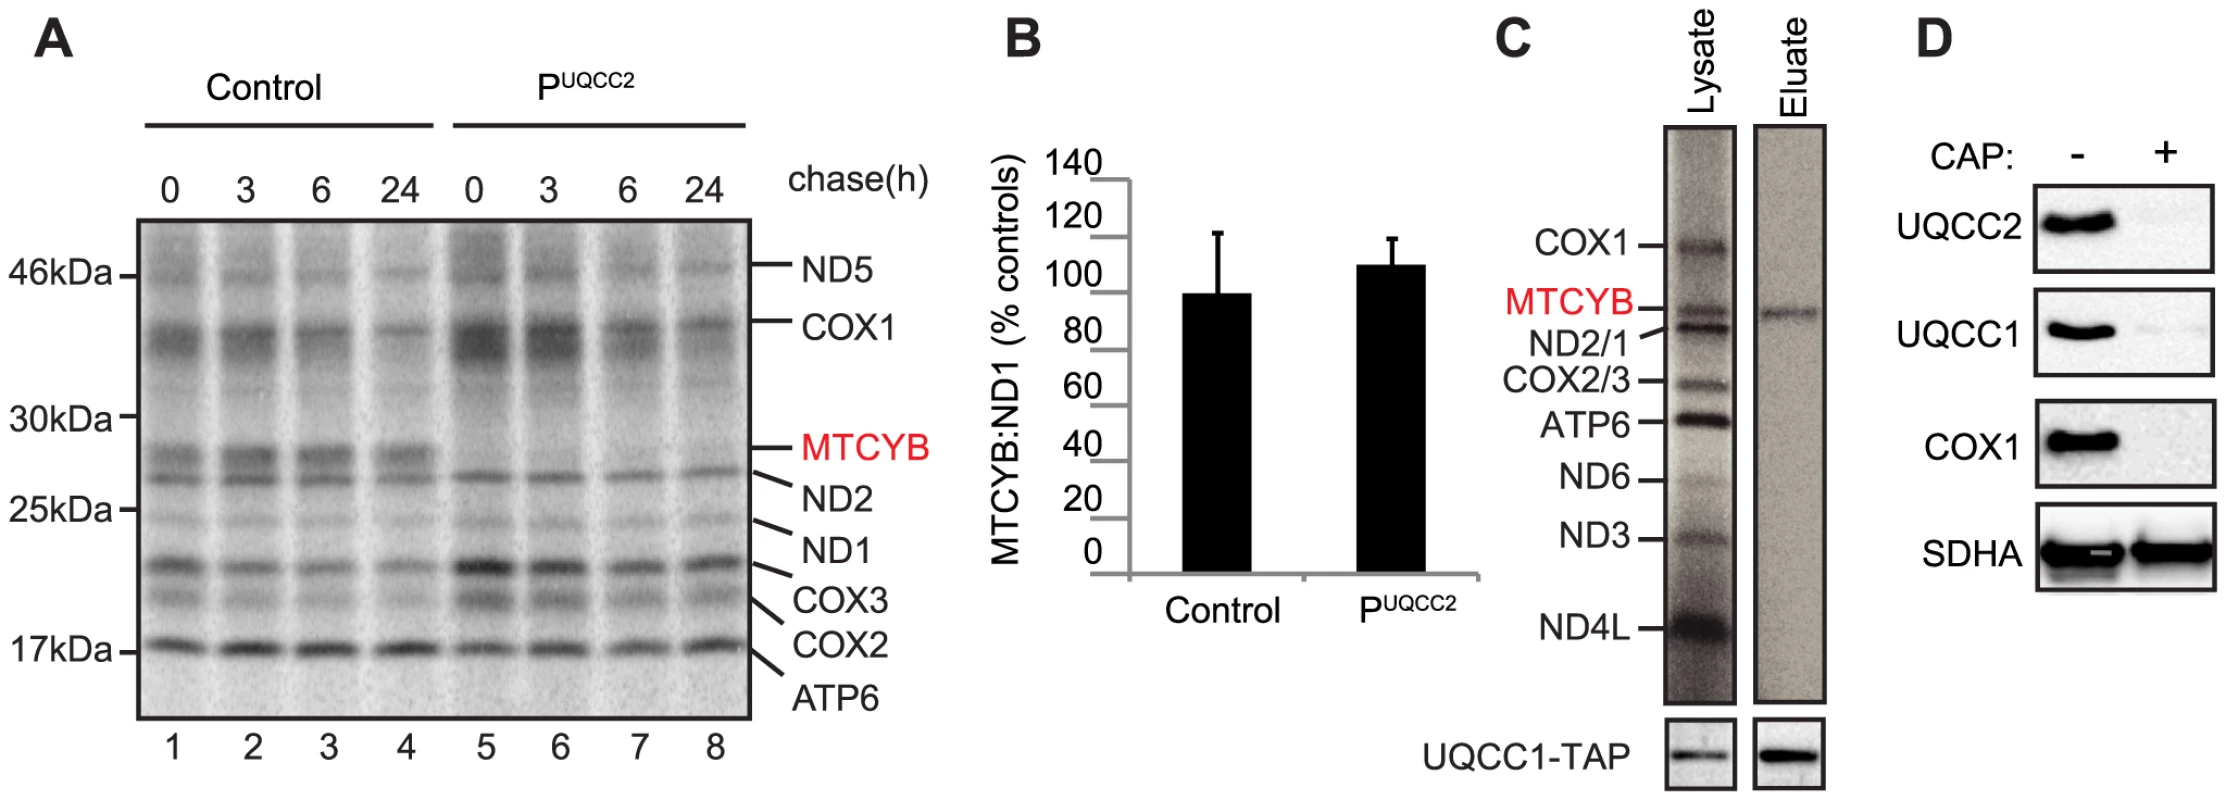 UQCC2 and UQCC1 are involved in cytochrome <i>b</i> translation and/or stability.